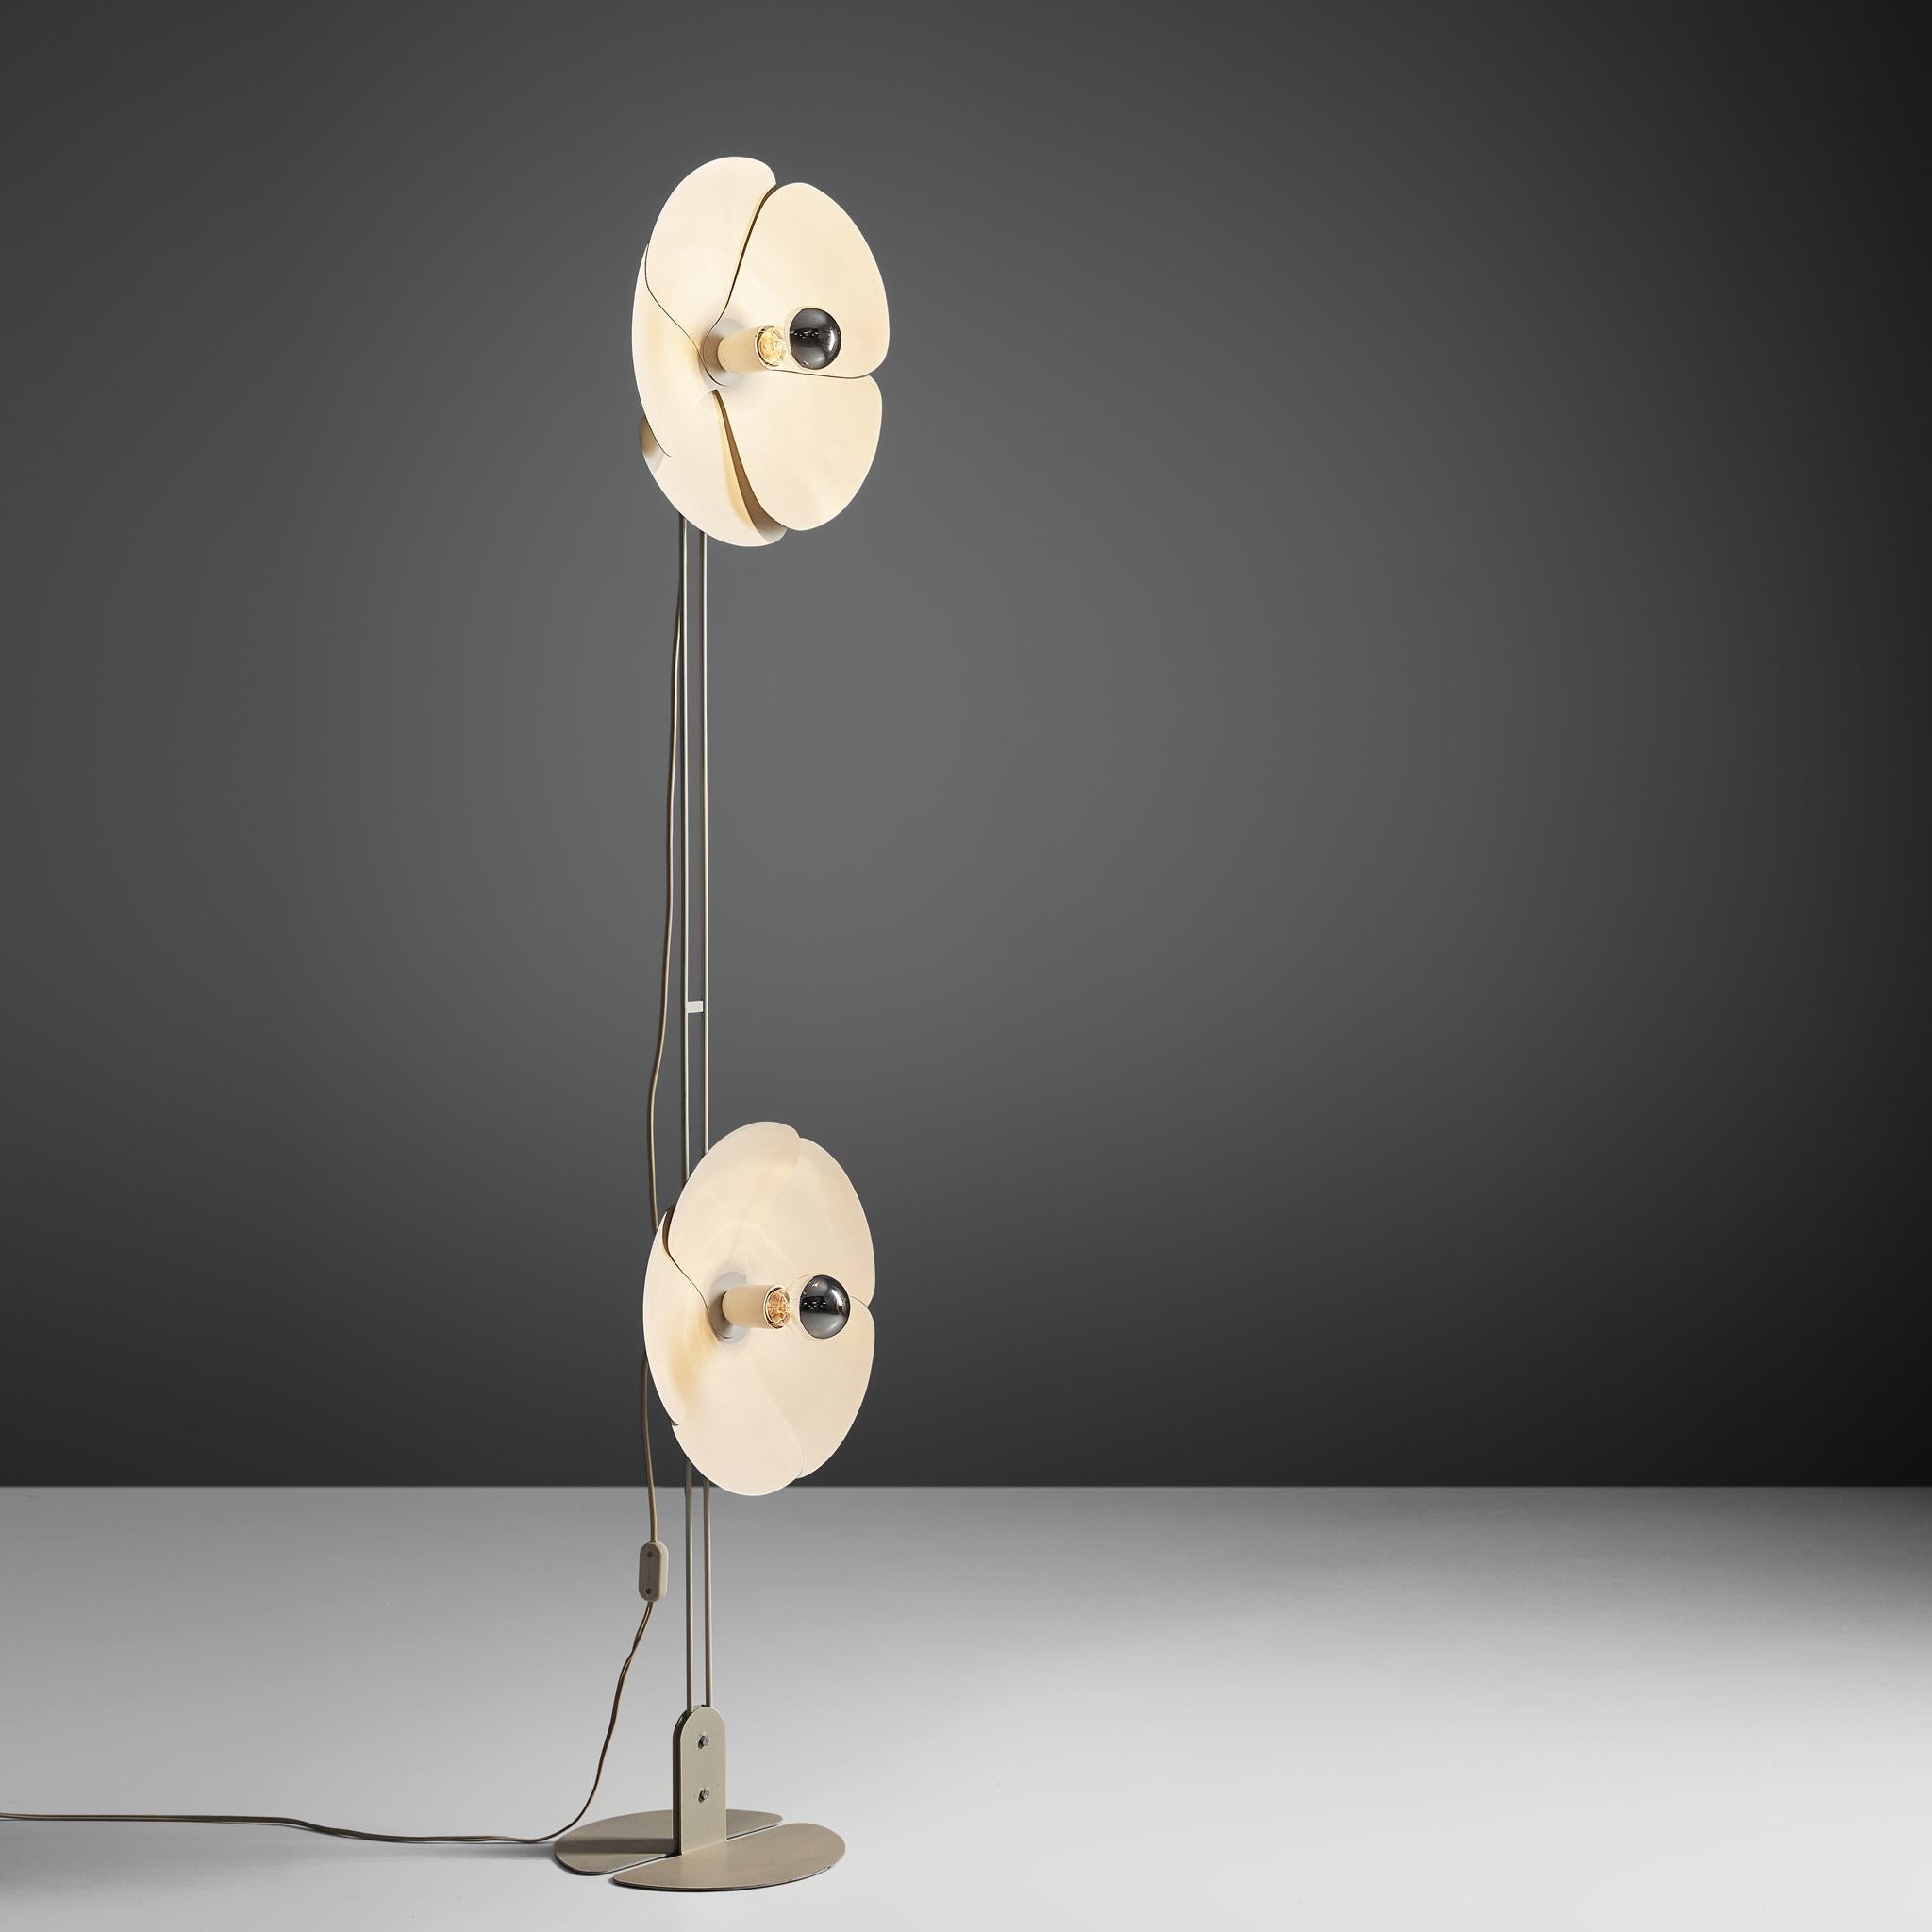 Olivier Mourgue for Disderot, floor lamp model '2093', chromed metal, aluminum, France, 1967

A floor lamp that features a stem with two flower shaped shades, that are adjustable in their height. The shades consist of five brushed aluminum leafs